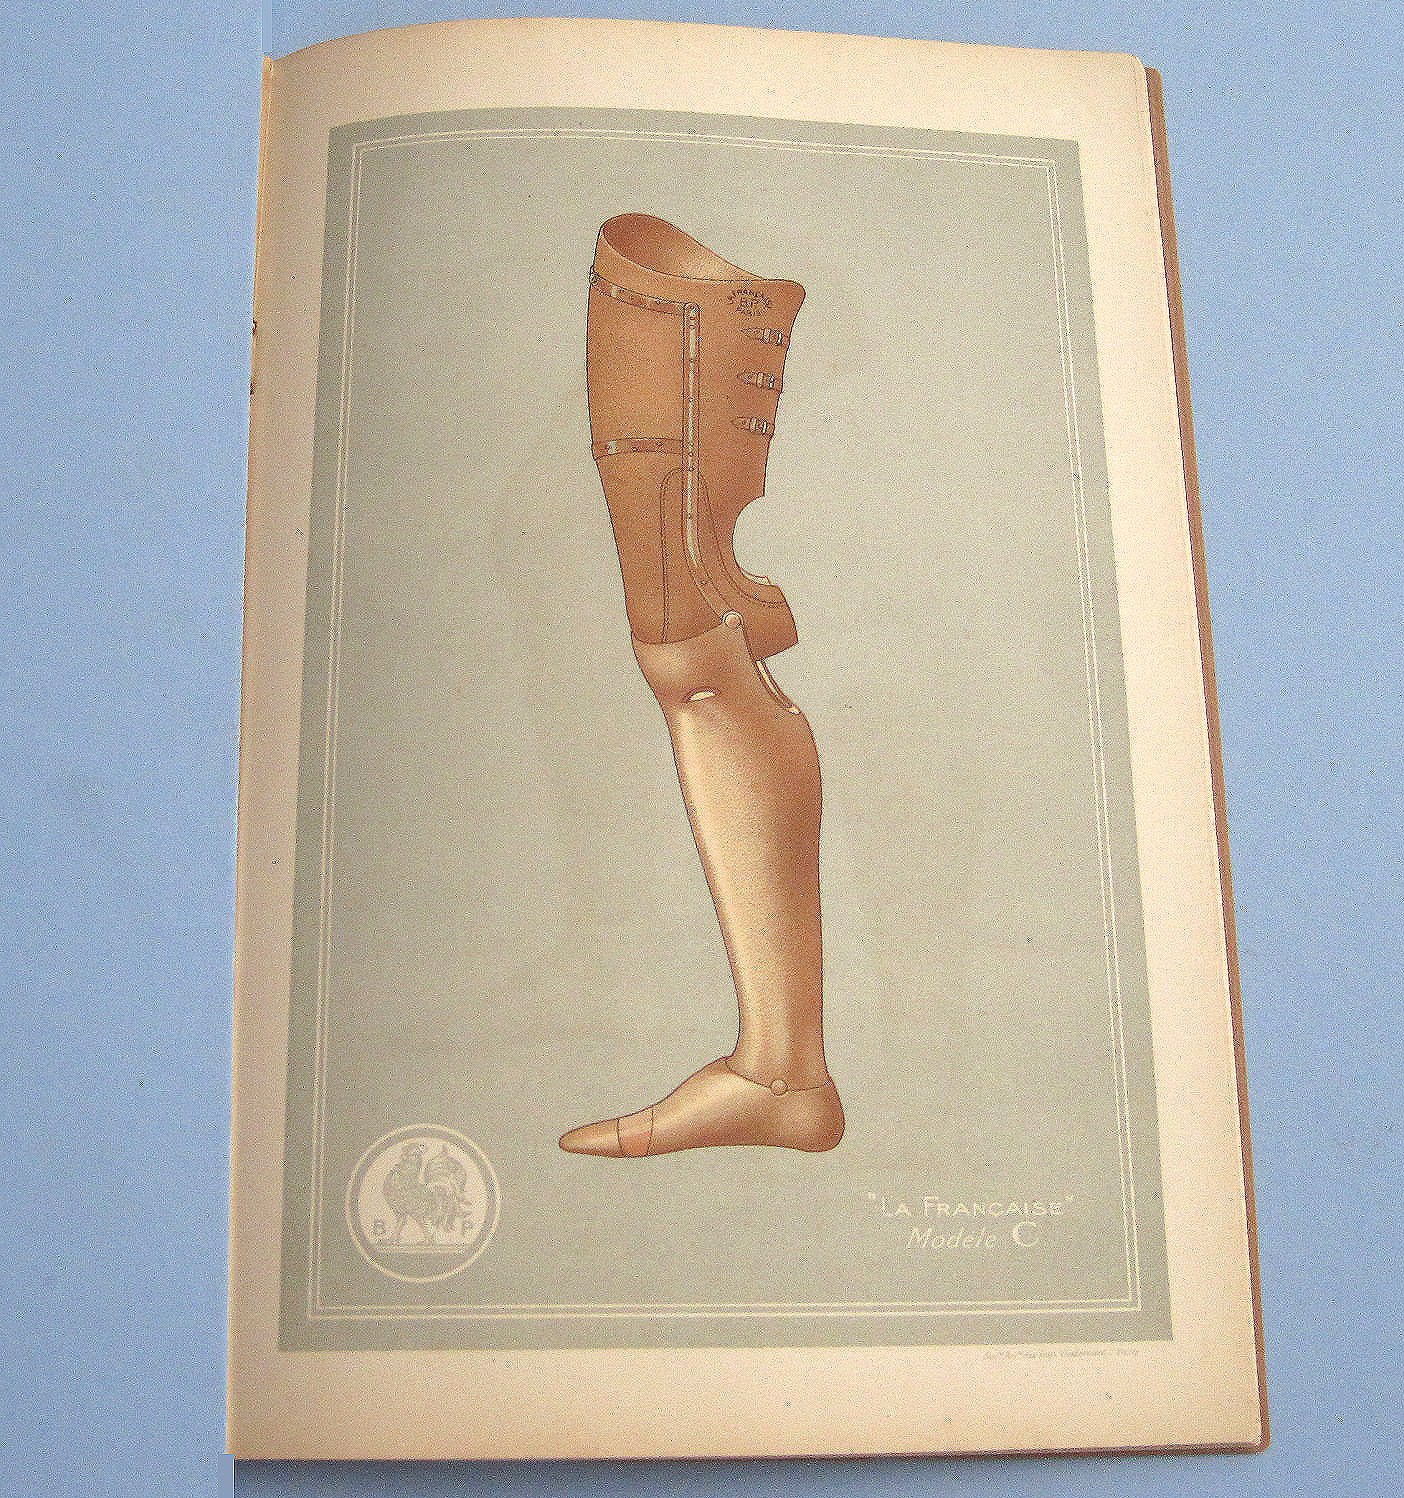 Early 20th c. Prostheses Catalogs